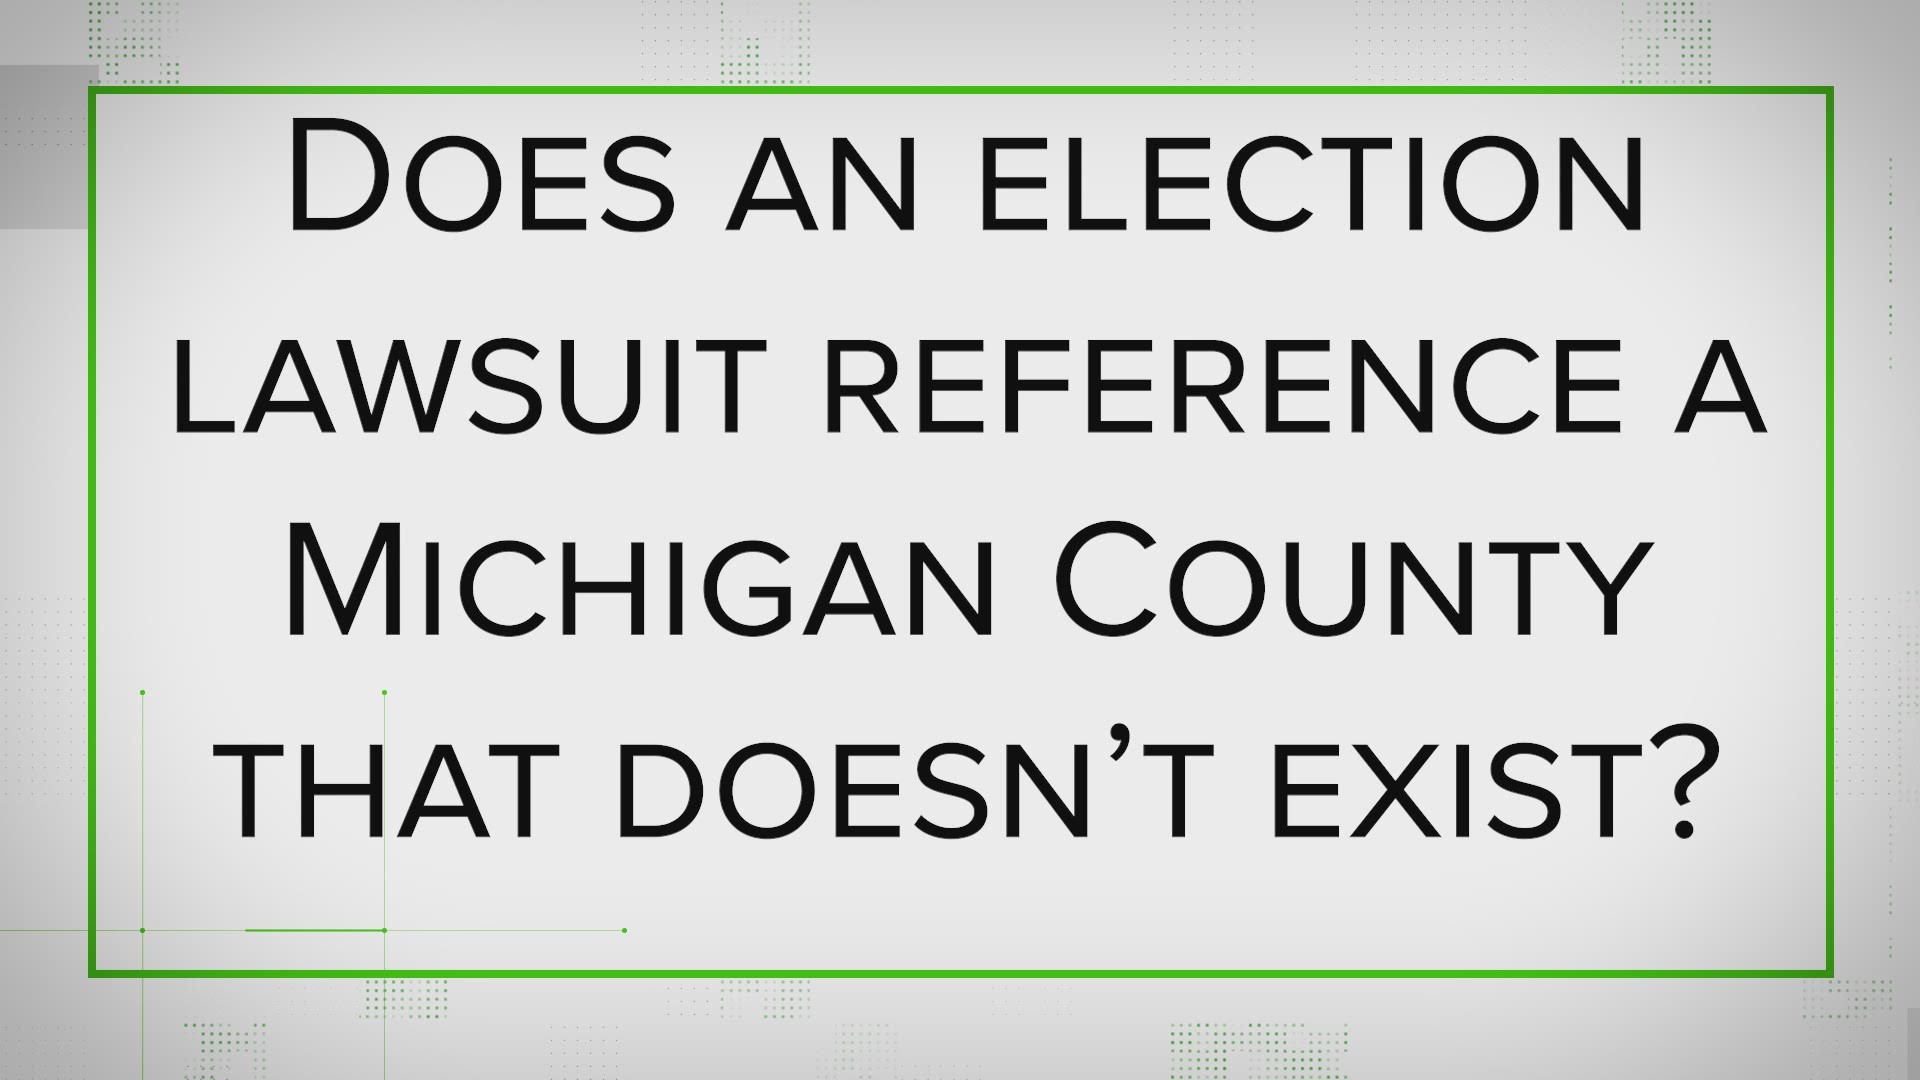 A lawsuit filed by Sidney Powell included a declaration that referenced irregularities in Edison County, Michigan. But that county doesn't exist.